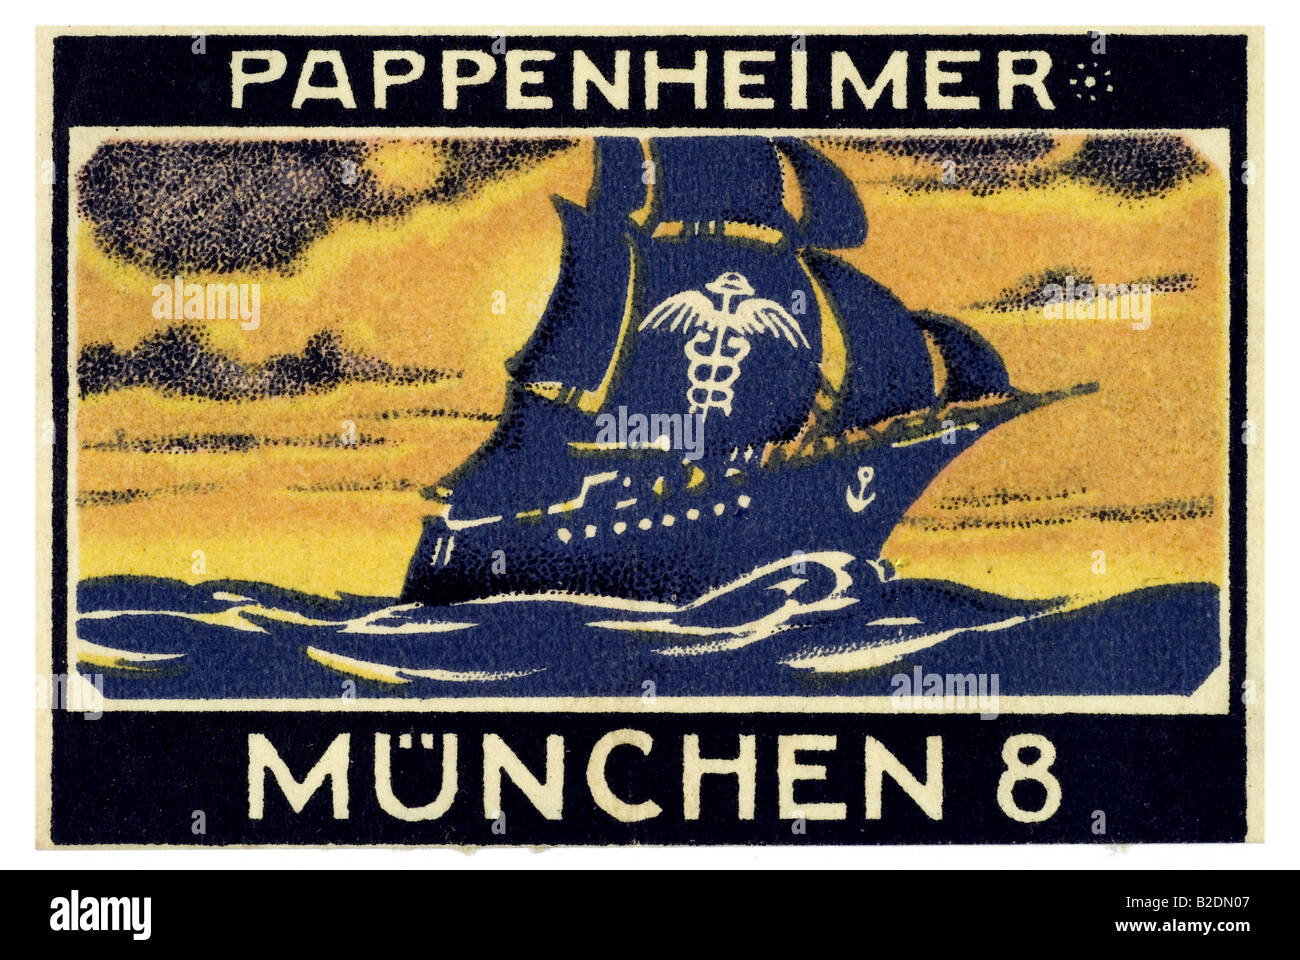 trading stamp Pappenheimer München 8 Stock Photo